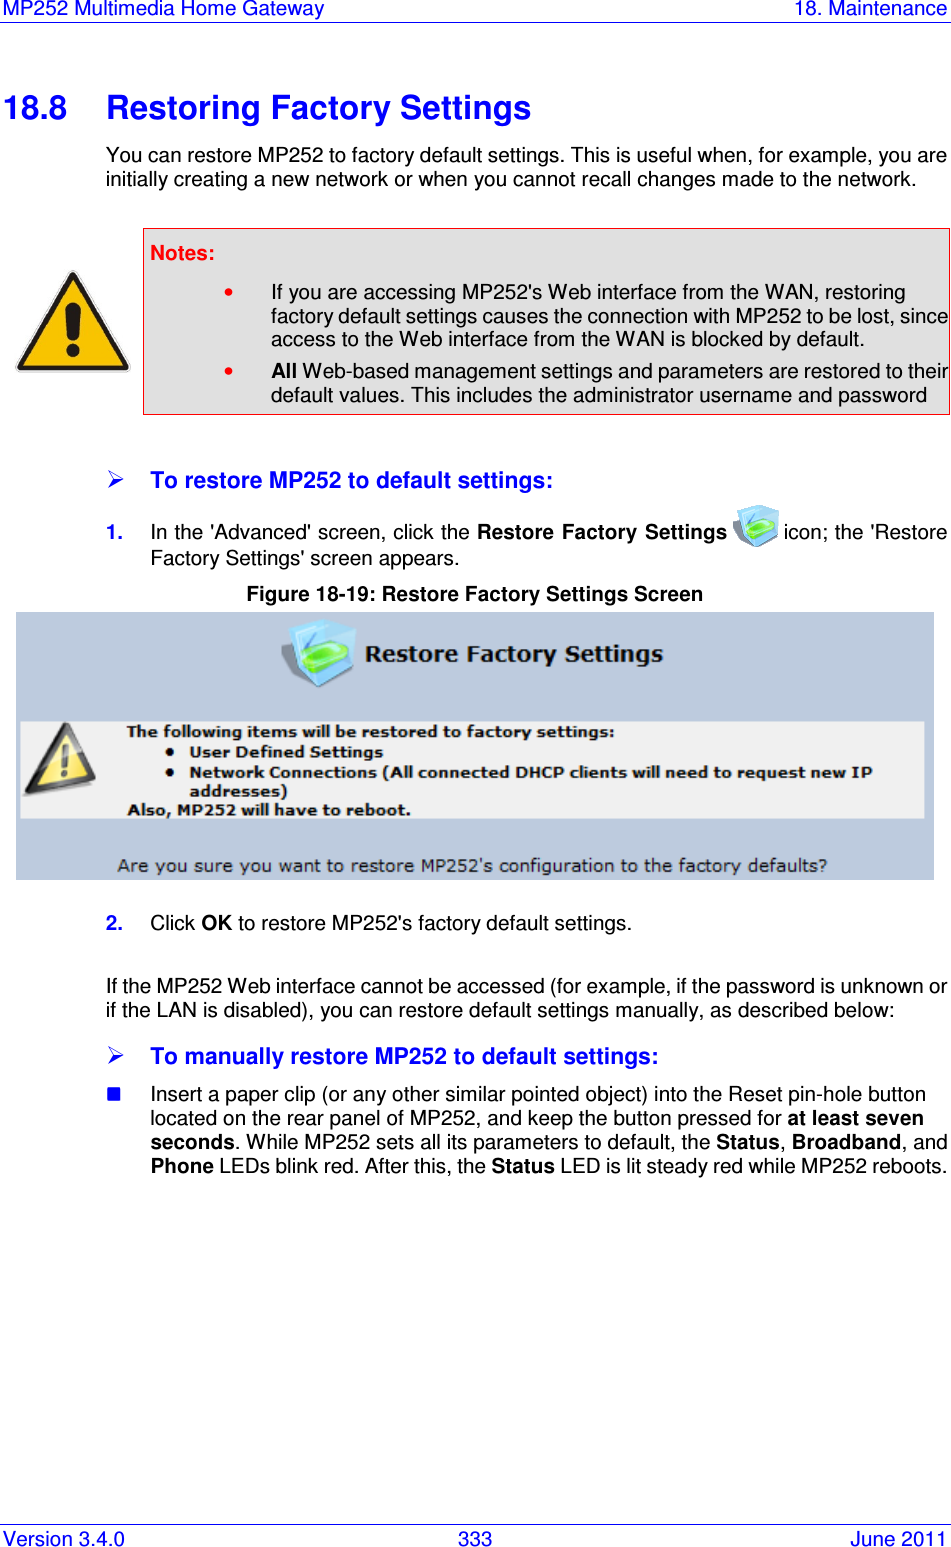 MP252 Multimedia Home Gateway  18. Maintenance Version 3.4.0  333  June 2011 18.8  Restoring Factory Settings You can restore MP252 to factory default settings. This is useful when, for example, you are initially creating a new network or when you cannot recall changes made to the network.   Notes:   • If you are accessing MP252&apos;s Web interface from the WAN, restoring factory default settings causes the connection with MP252 to be lost, since access to the Web interface from the WAN is blocked by default. • All Web-based management settings and parameters are restored to their default values. This includes the administrator username and password   To restore MP252 to default settings: 1.  In the &apos;Advanced&apos; screen, click the Restore Factory Settings  icon; the &apos;Restore Factory Settings&apos; screen appears. Figure 18-19: Restore Factory Settings Screen  2.  Click OK to restore MP252&apos;s factory default settings.  If the MP252 Web interface cannot be accessed (for example, if the password is unknown or if the LAN is disabled), you can restore default settings manually, as described below:  To manually restore MP252 to default settings:  Insert a paper clip (or any other similar pointed object) into the Reset pin-hole button located on the rear panel of MP252, and keep the button pressed for at least seven seconds. While MP252 sets all its parameters to default, the Status, Broadband, and Phone LEDs blink red. After this, the Status LED is lit steady red while MP252 reboots.    